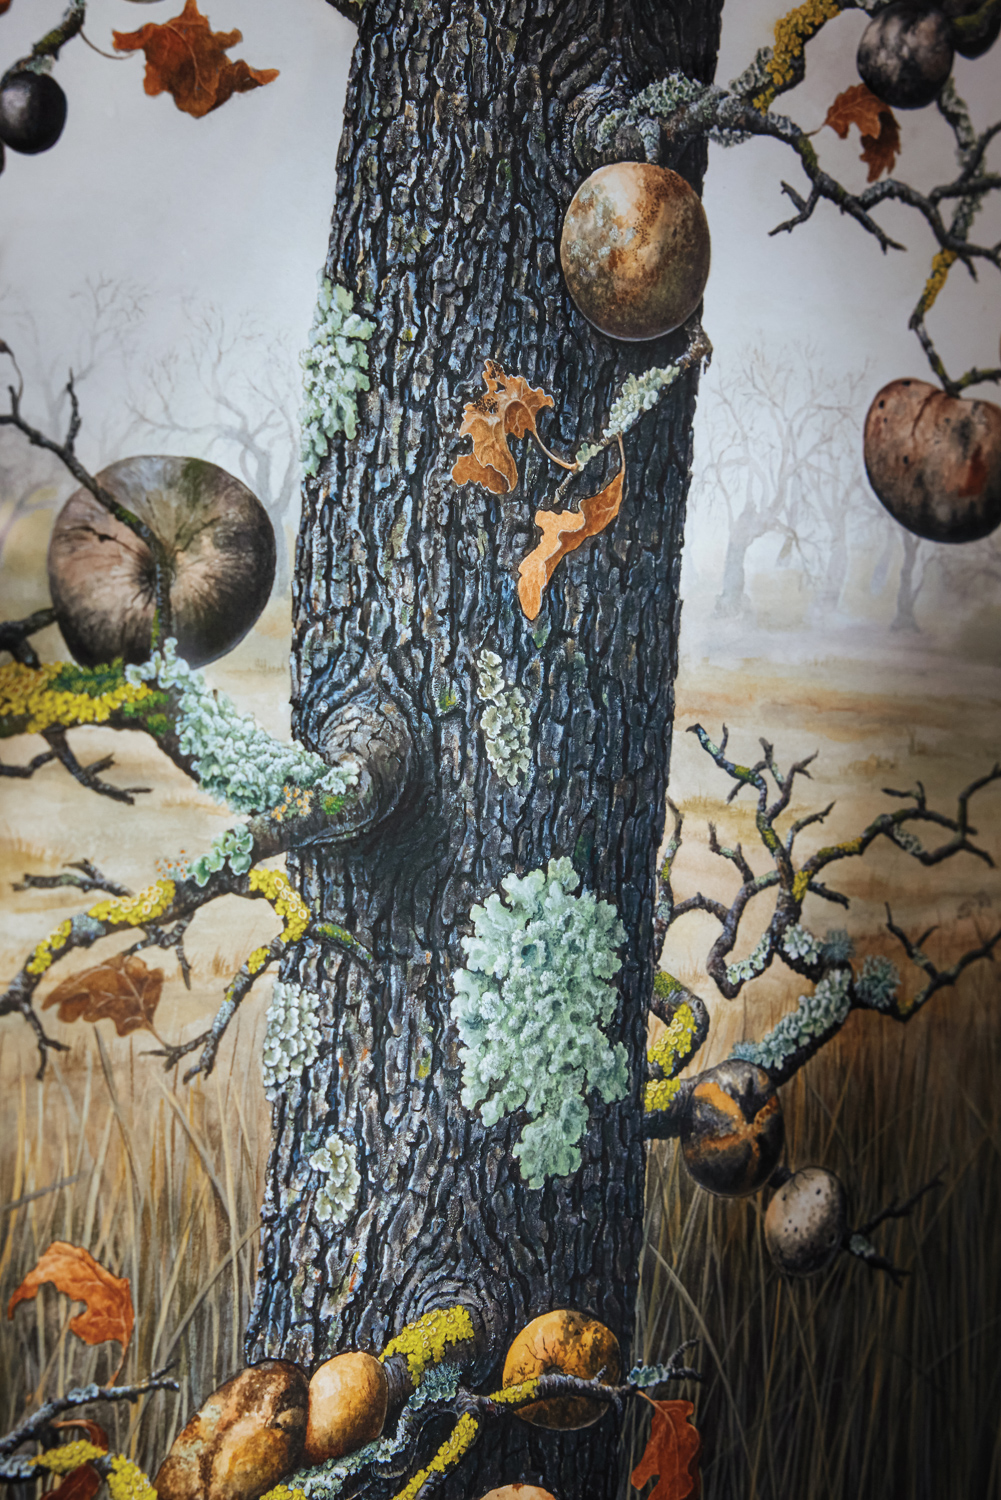 A painting by Lucy Martin shows the details of a tree trunk